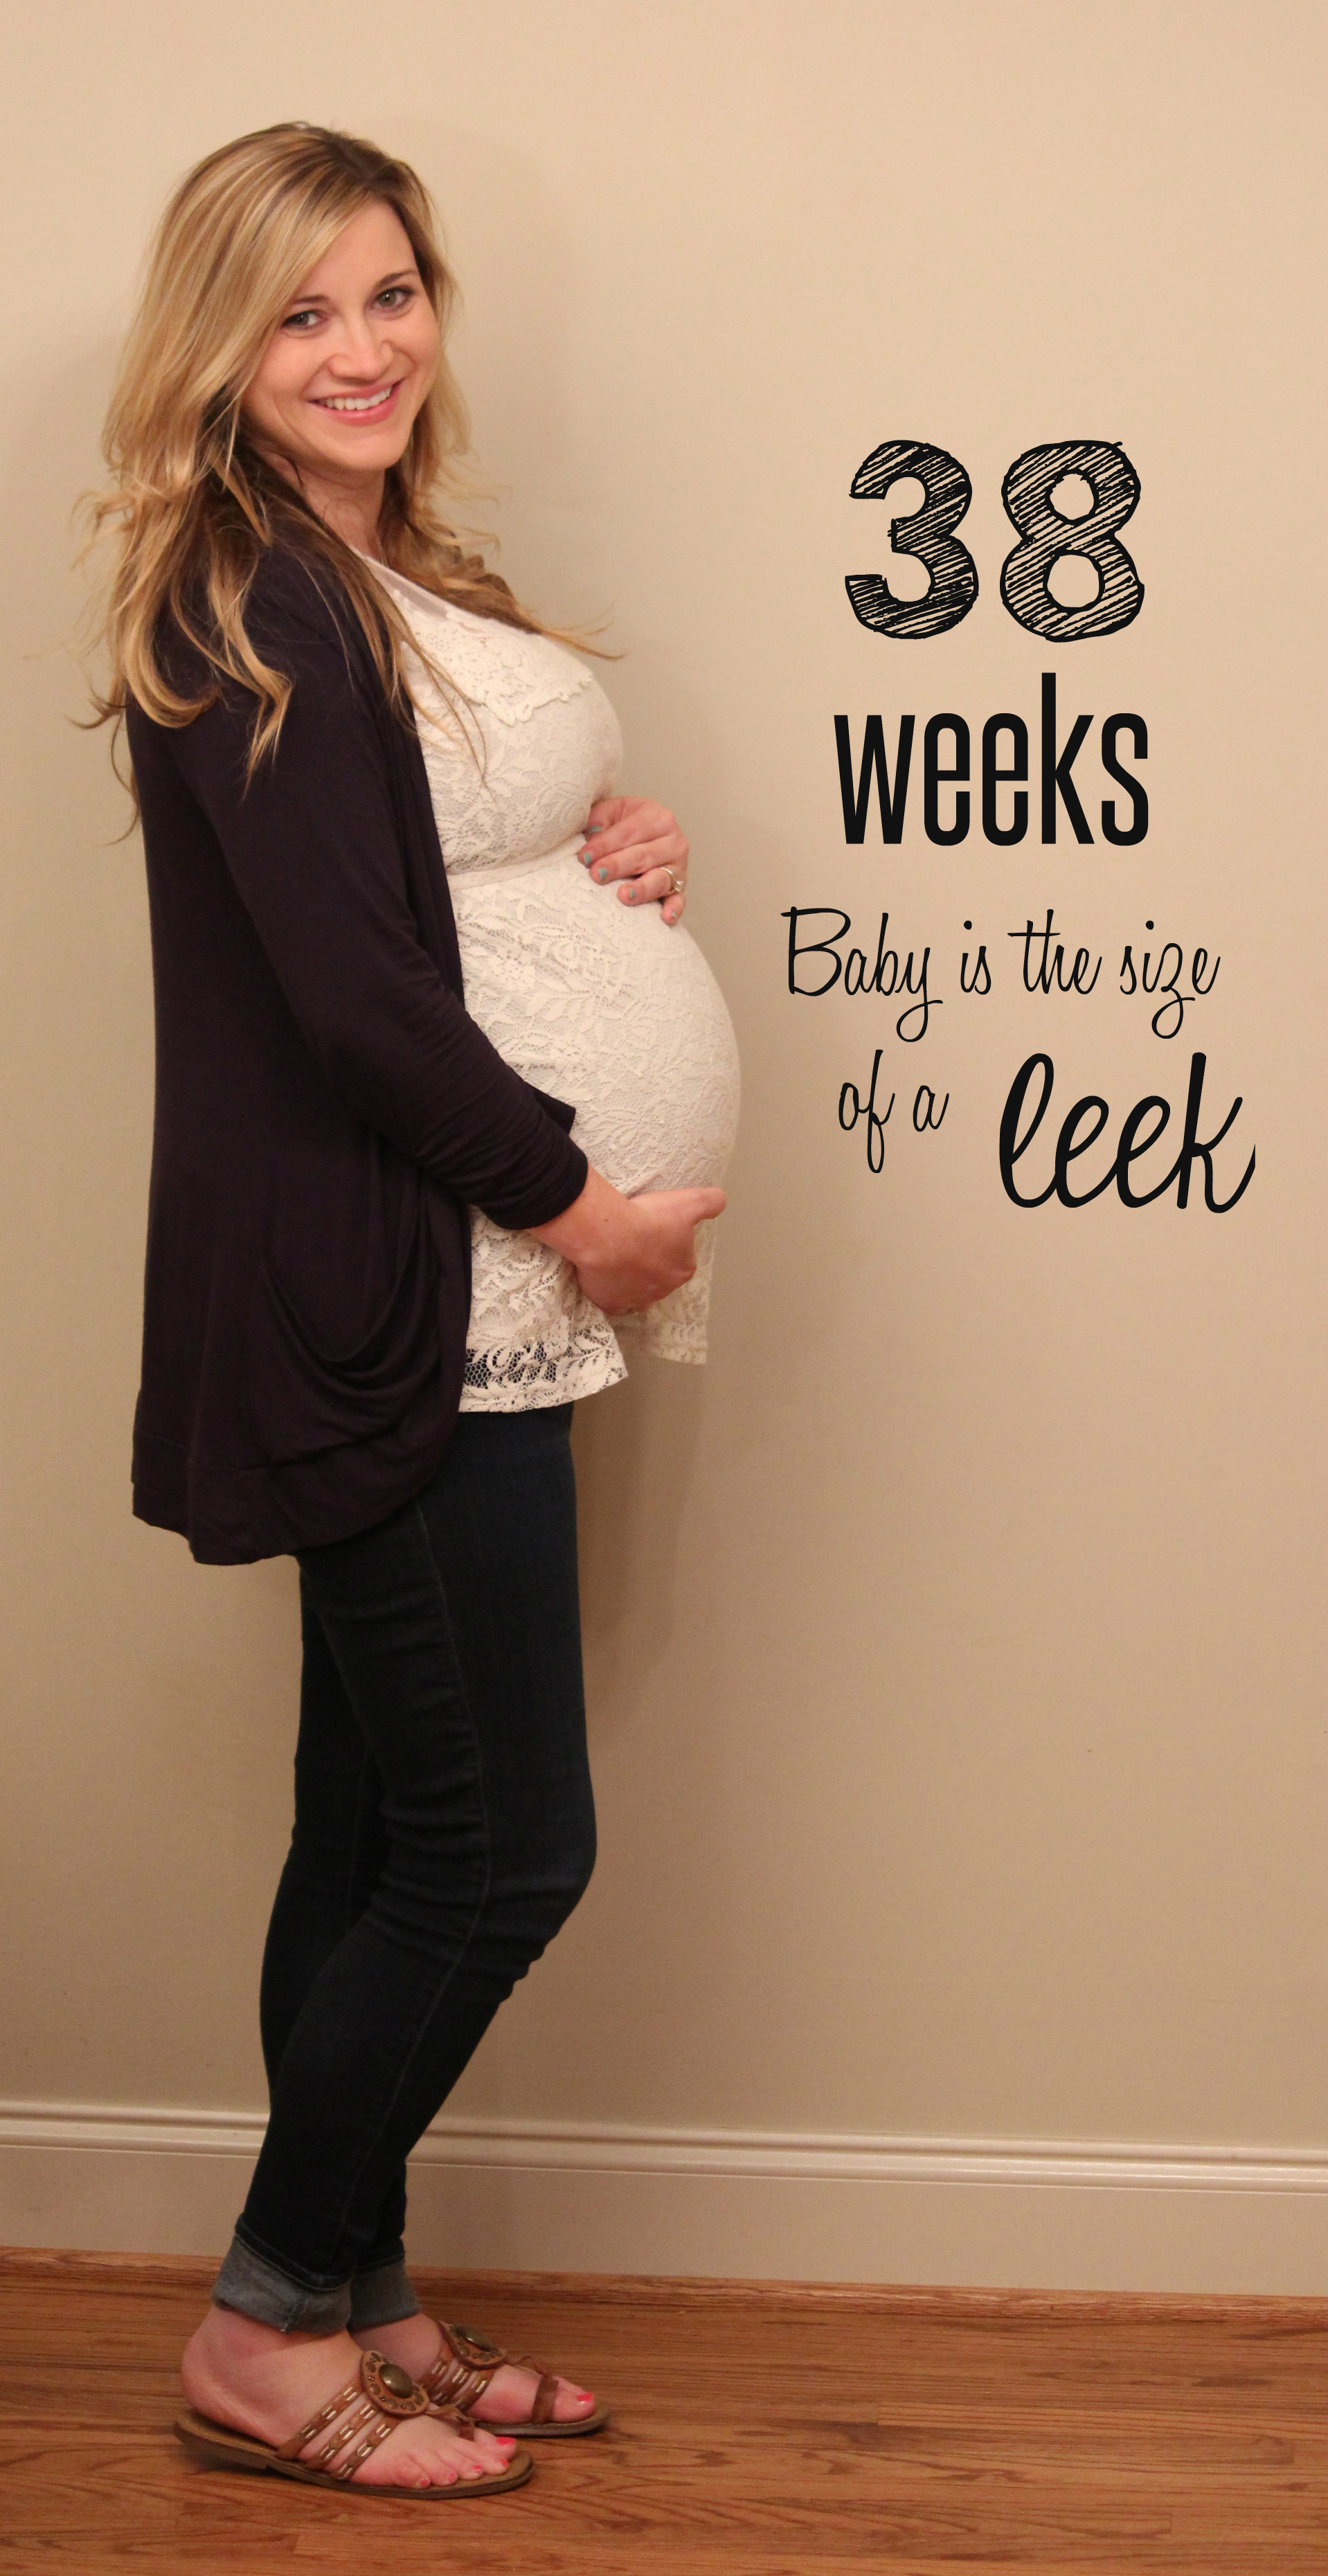 Is A 38 Weeks Baby Fully Developed?